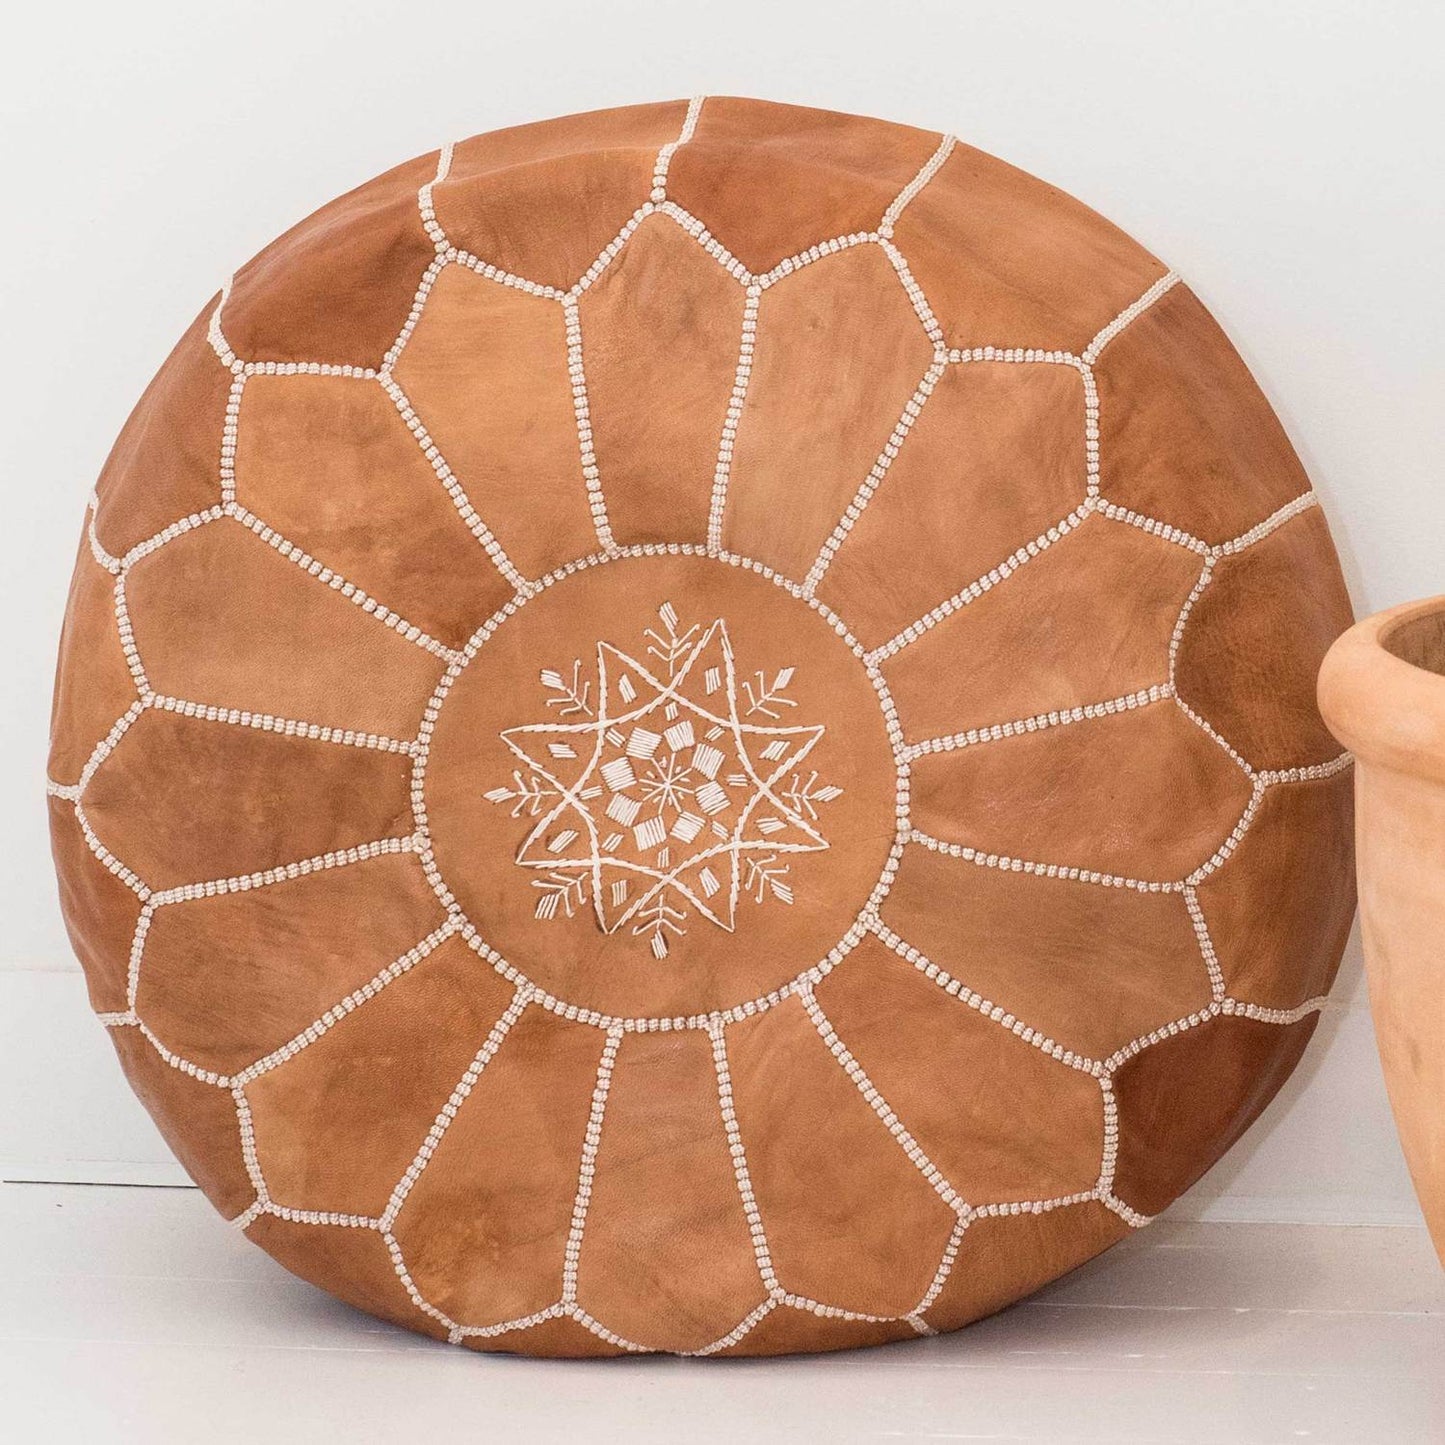 Leather Poufs Brown Pre-stuffed / Buy More Than 1, Get 5% OFF